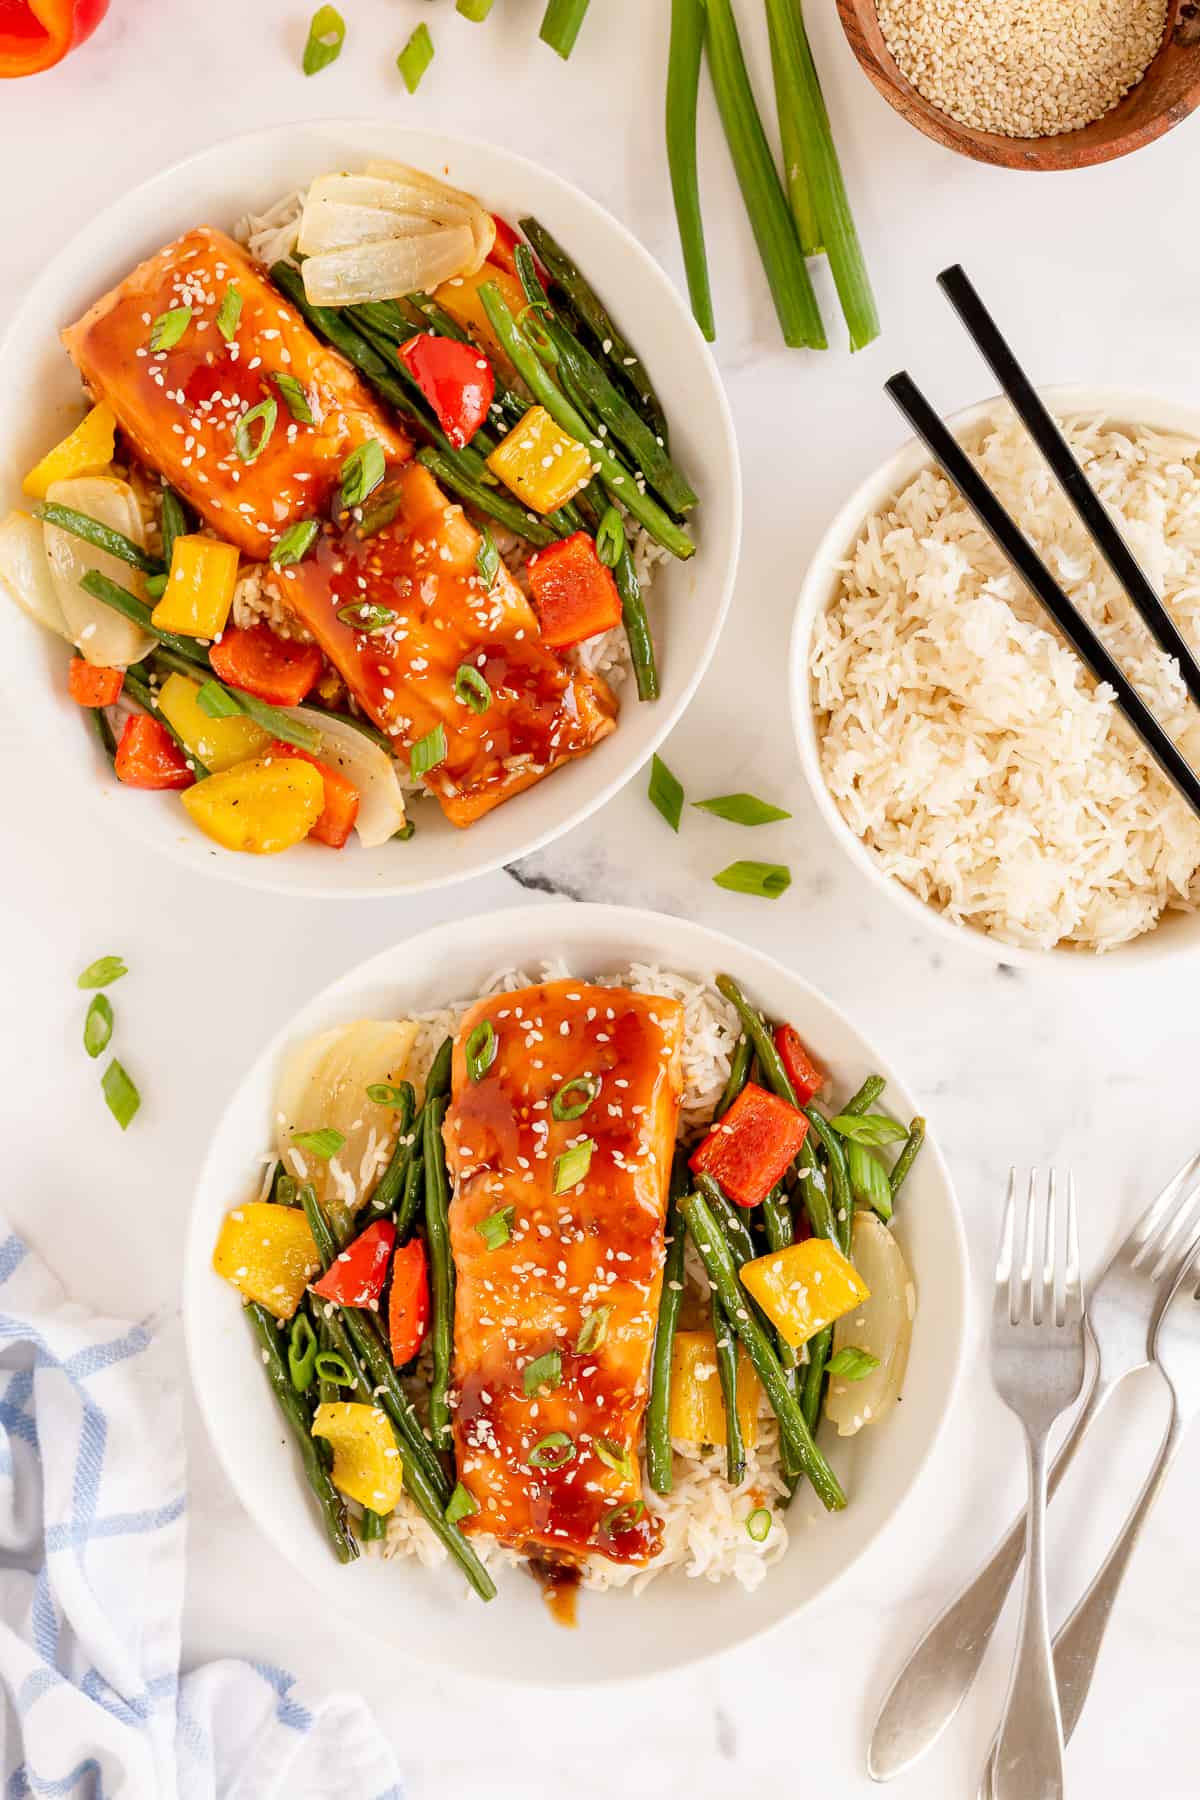 Two bowls filled with vegetables and salmon teriyaki on rice.